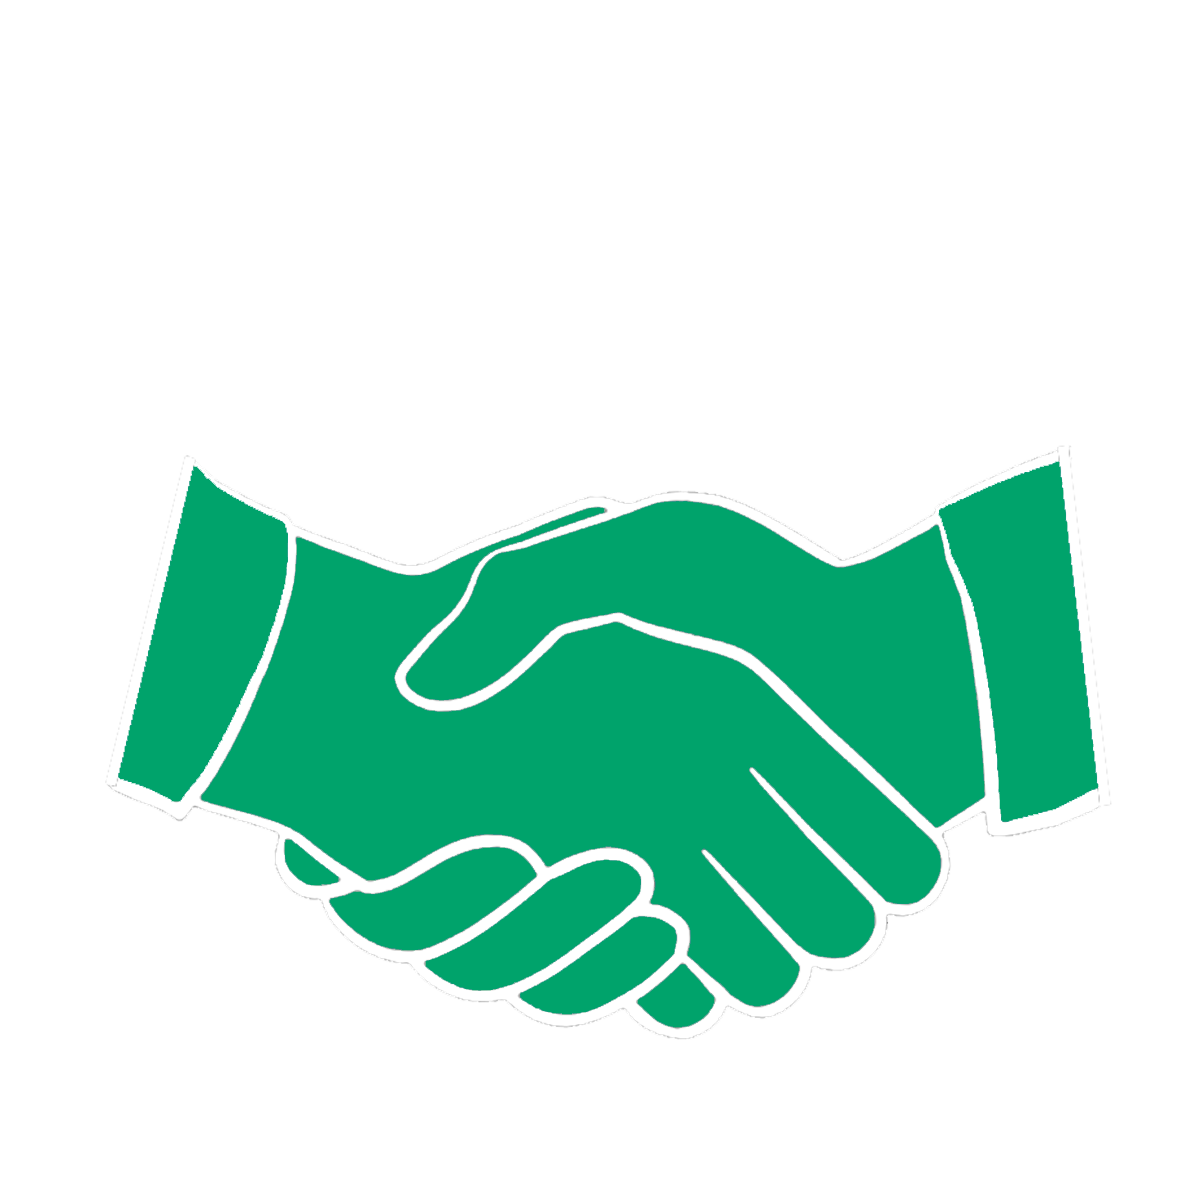 Trustees Network Group